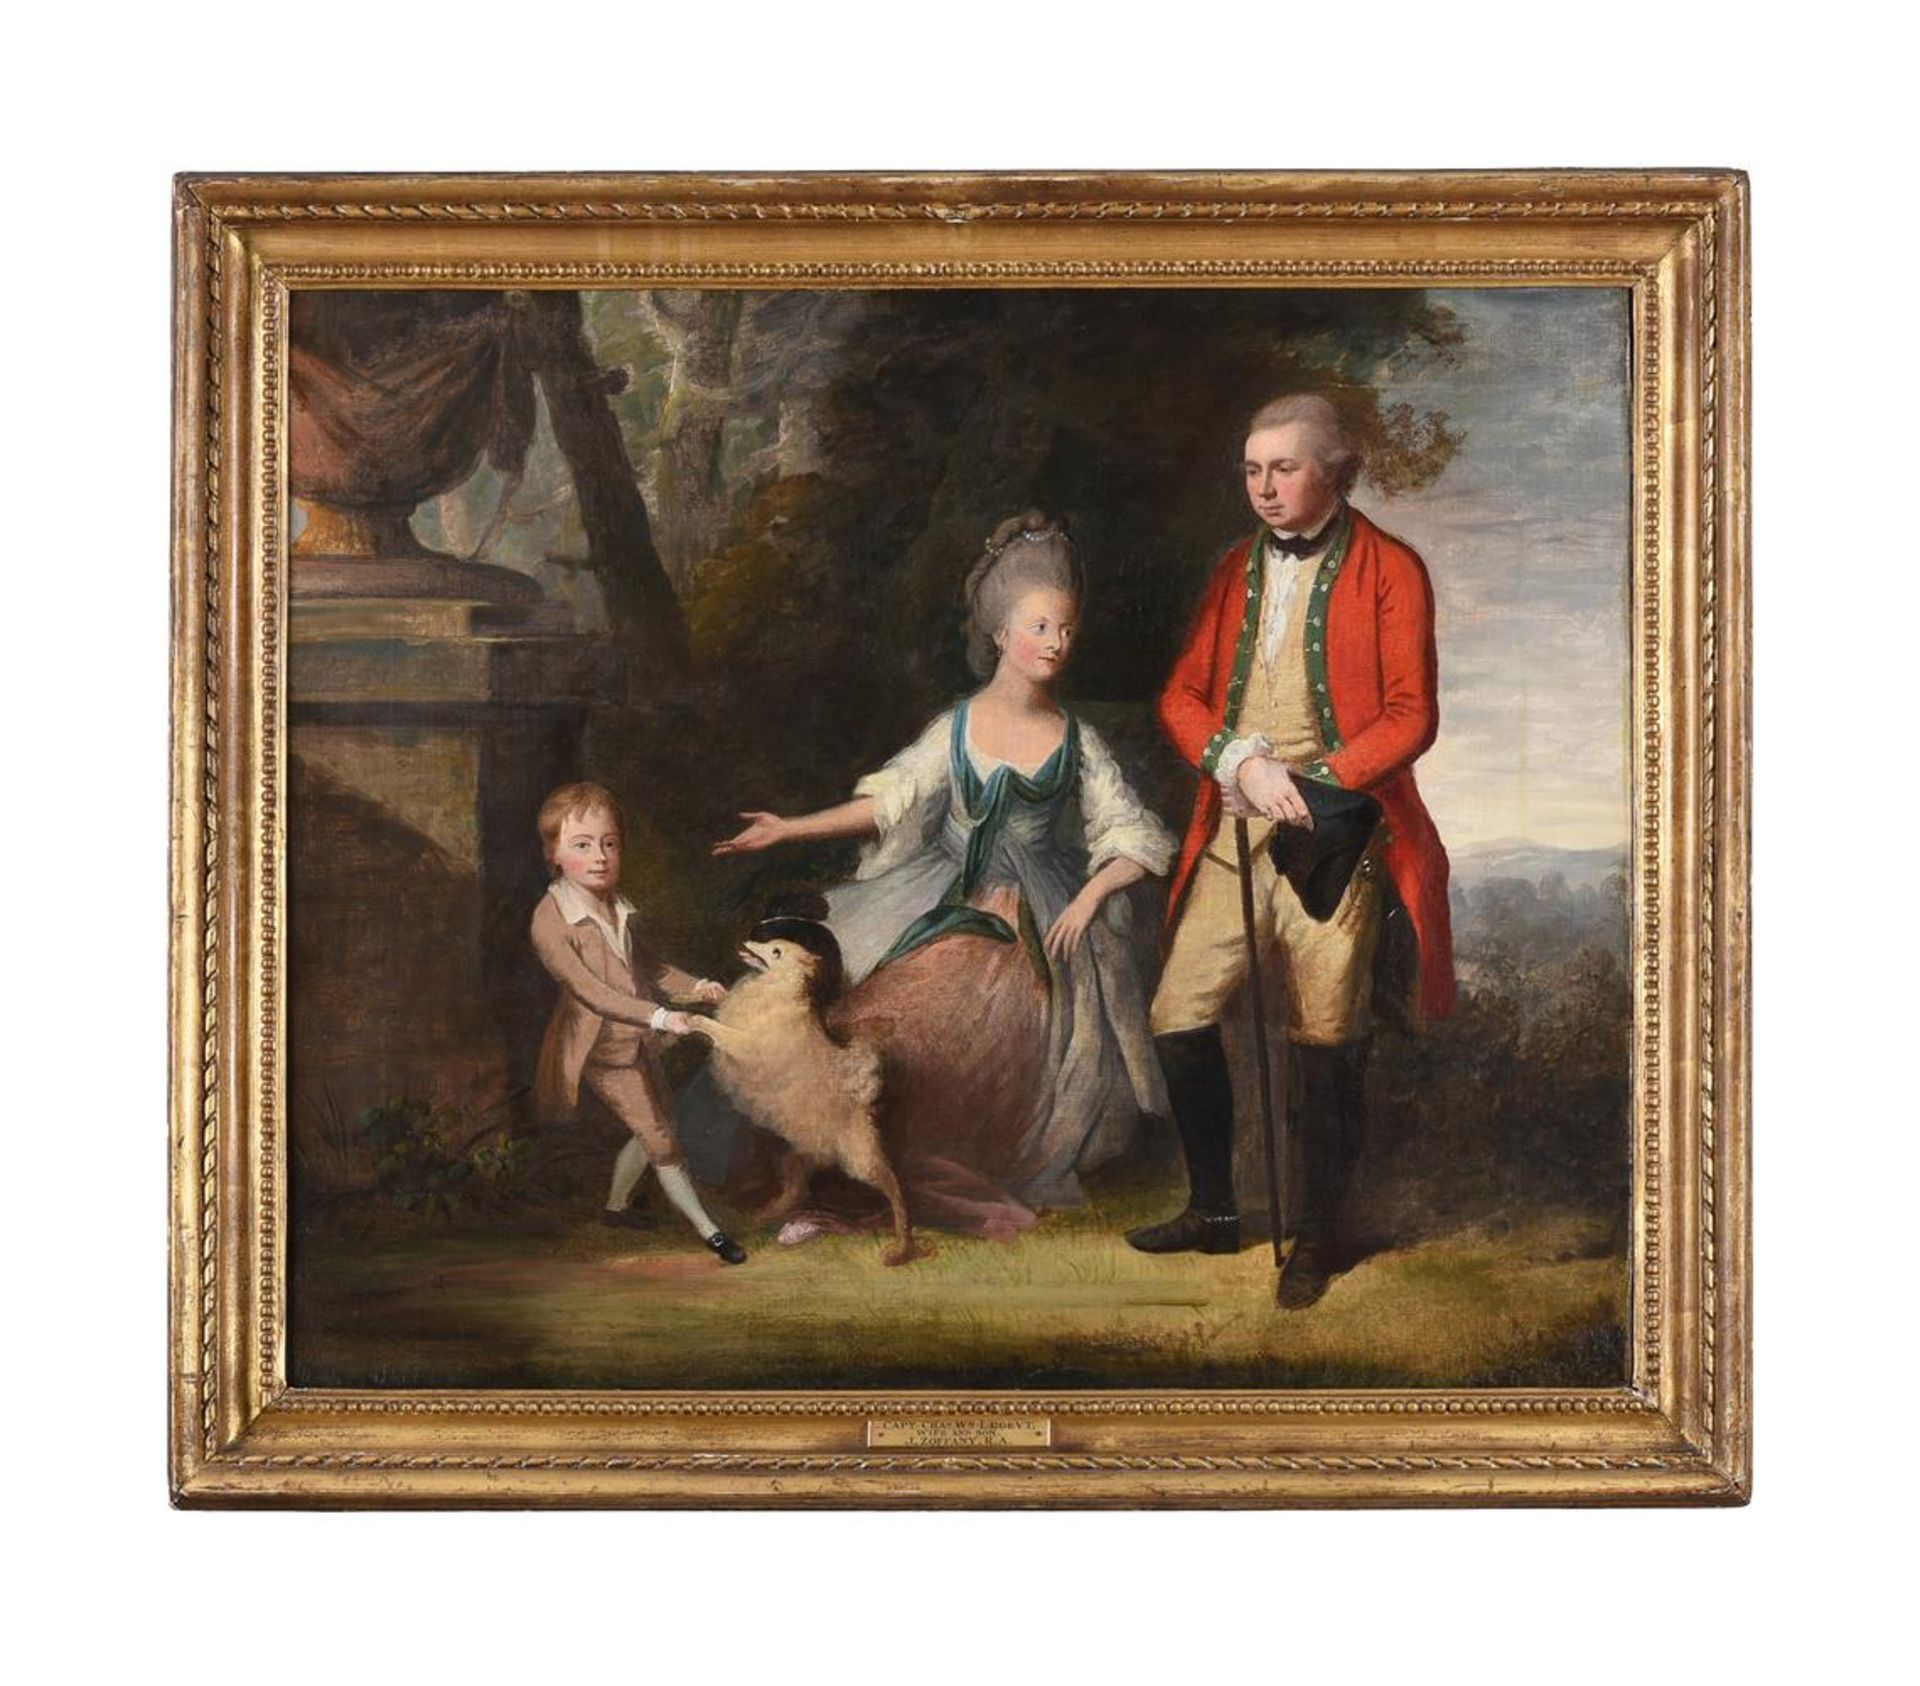 FOLLOWER OF JOHANN JOSEPH ZOFFANY, PORTRAIT OF CAPTAIN CHARLES WILLIAM LE GEYT WITH HIS WIFE AND SON - Image 2 of 3